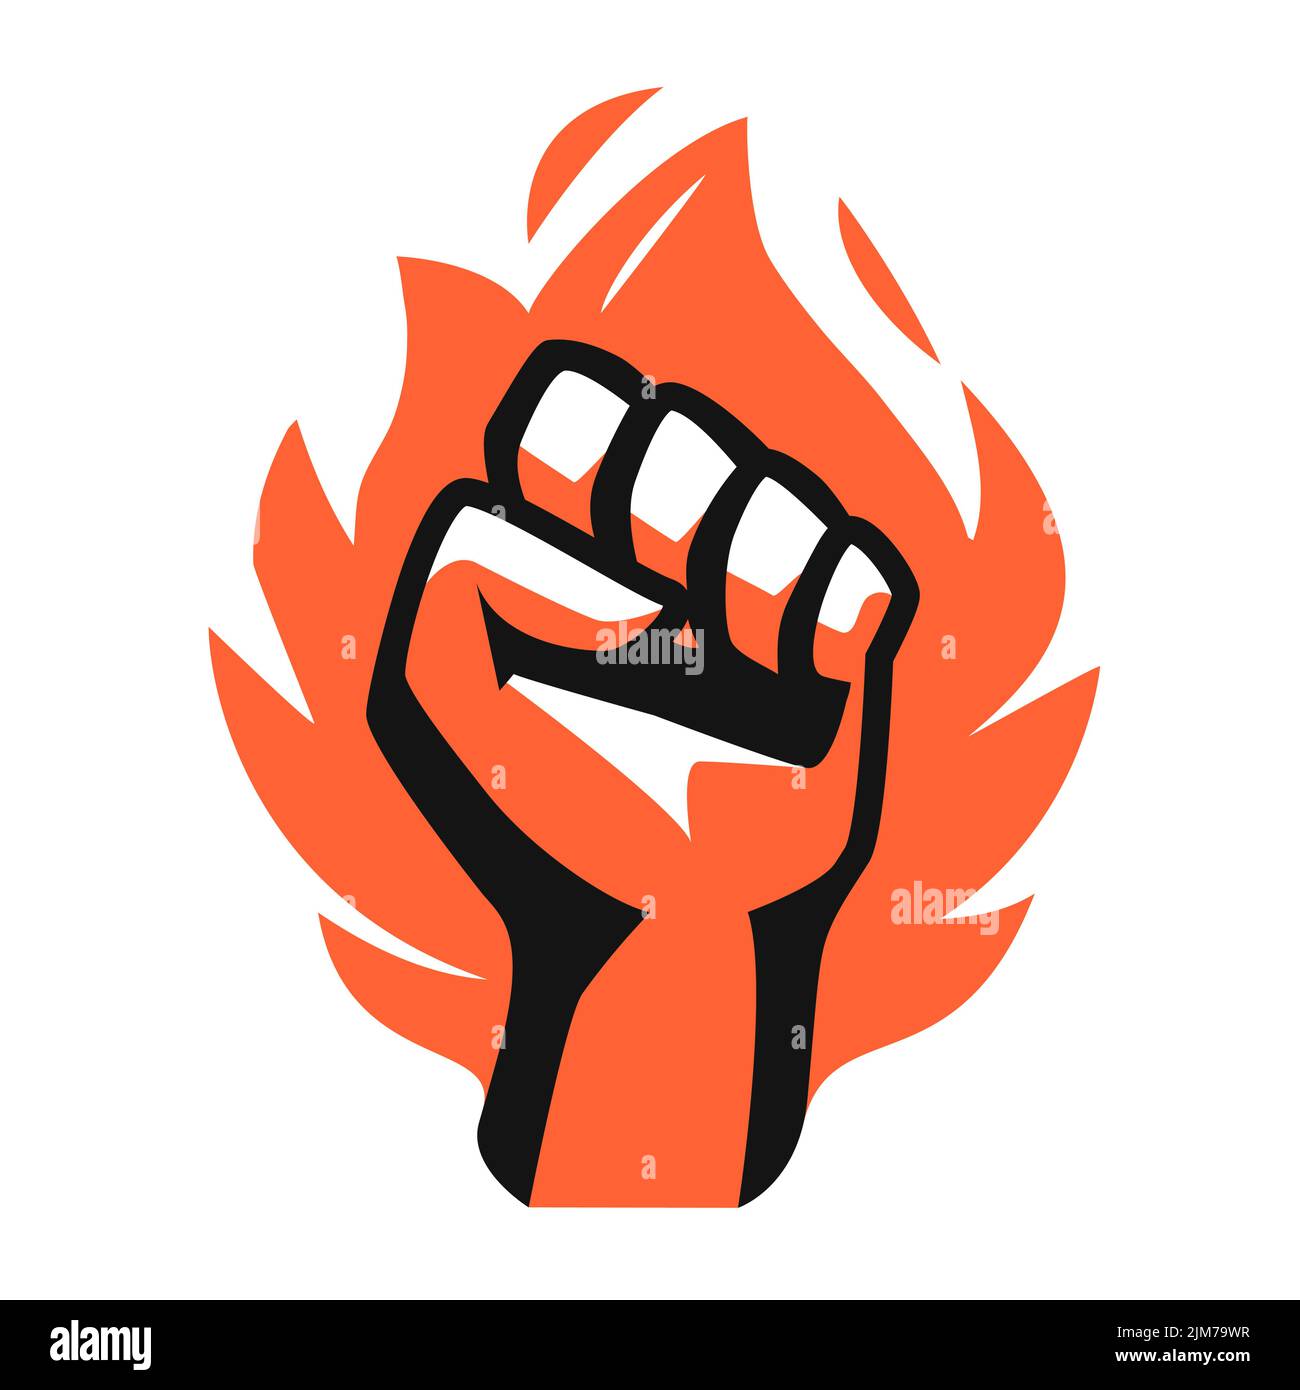 Fist and fire emblem isolated. Hand clenched power strength icon symbol. Vector illustration Stock Vector